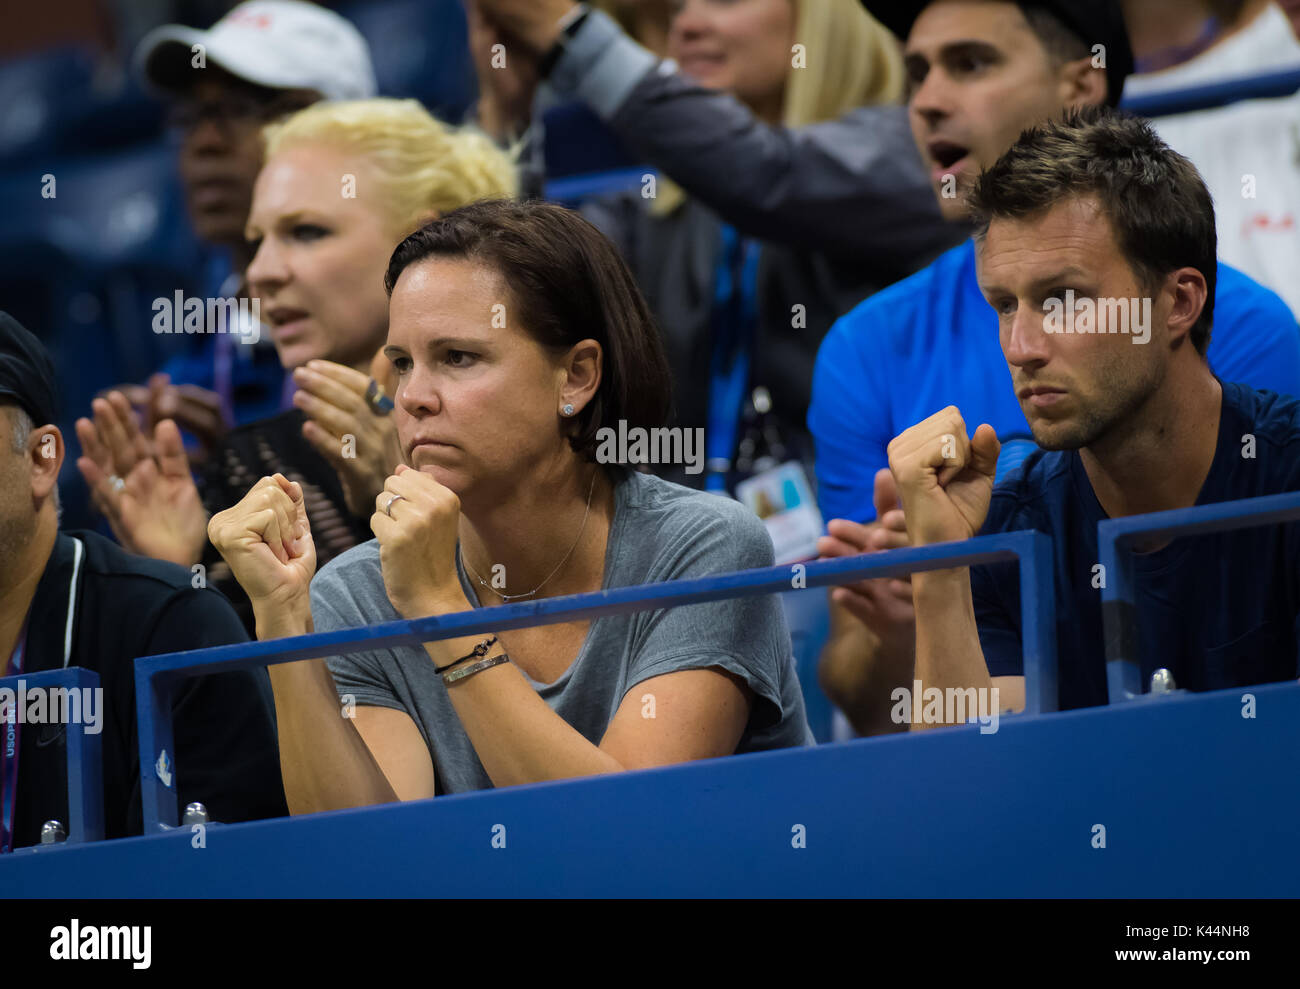 New York City, United States. 4 September, 2017. Lindsay Davenport at the 2017 US Open Grand Slam tennis tournament © Jimmie48 Photography/Alamy Live News Stock Photo